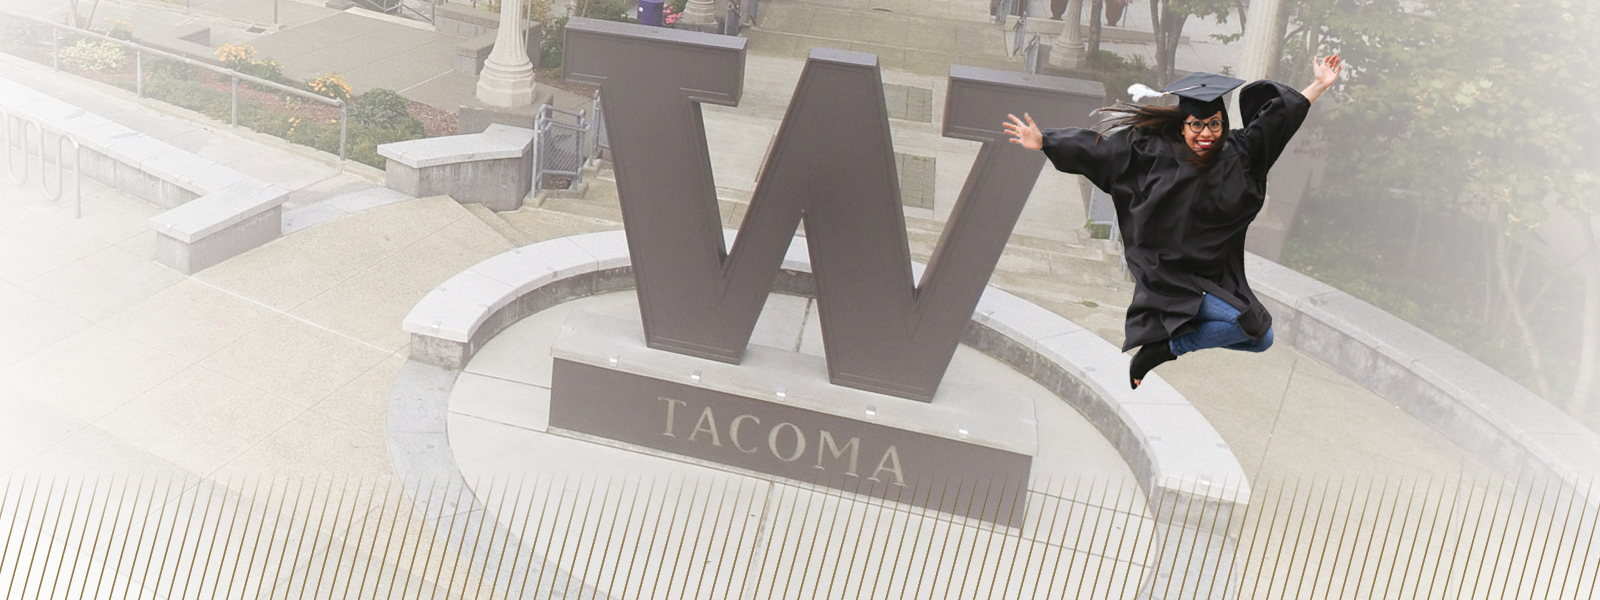 Photo illustration showing UW Tacoma grad flying through air before campus steel W.